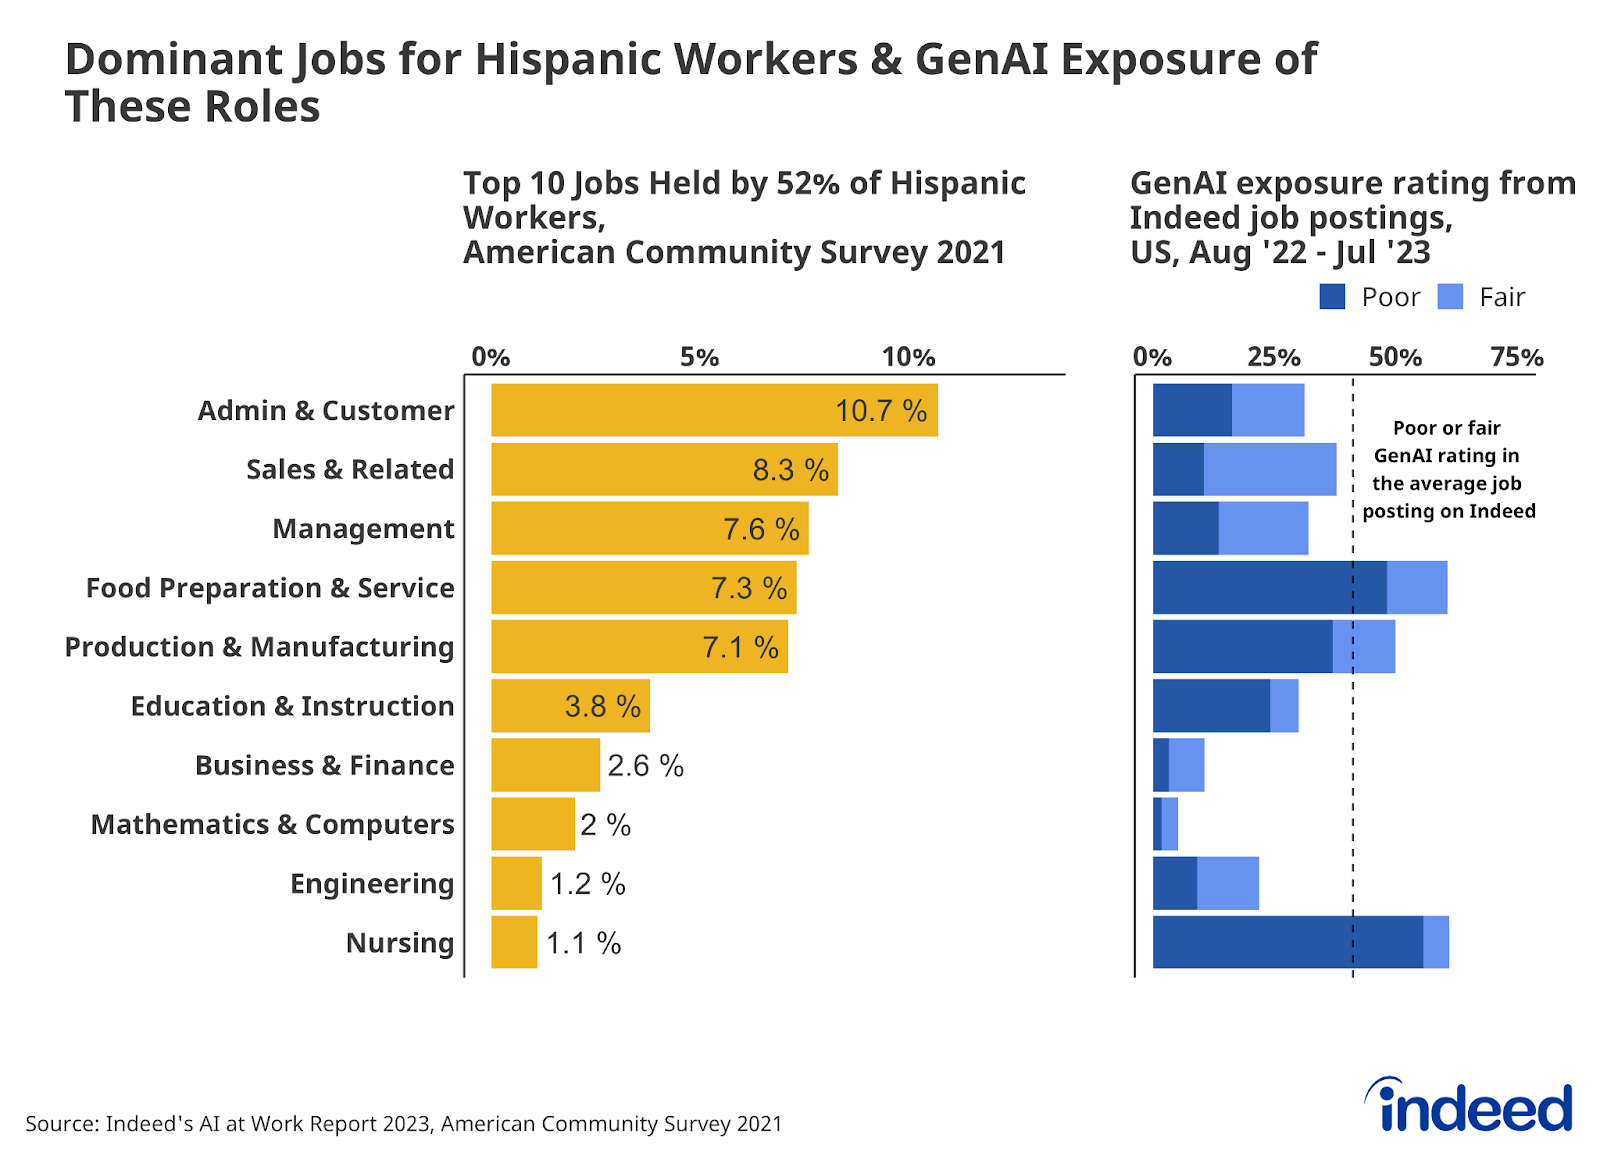 A series of bar graphs titled "Dominant jobs for Hispanic workers & GenAI exposure of these roles," shows the top 10 jobs held by 52% of Hispanic workers and the corresponding GenAI exposure rating for those jobs. Admin & Customer was the most common type of job at 10.7%, while Nursing was the rarest.